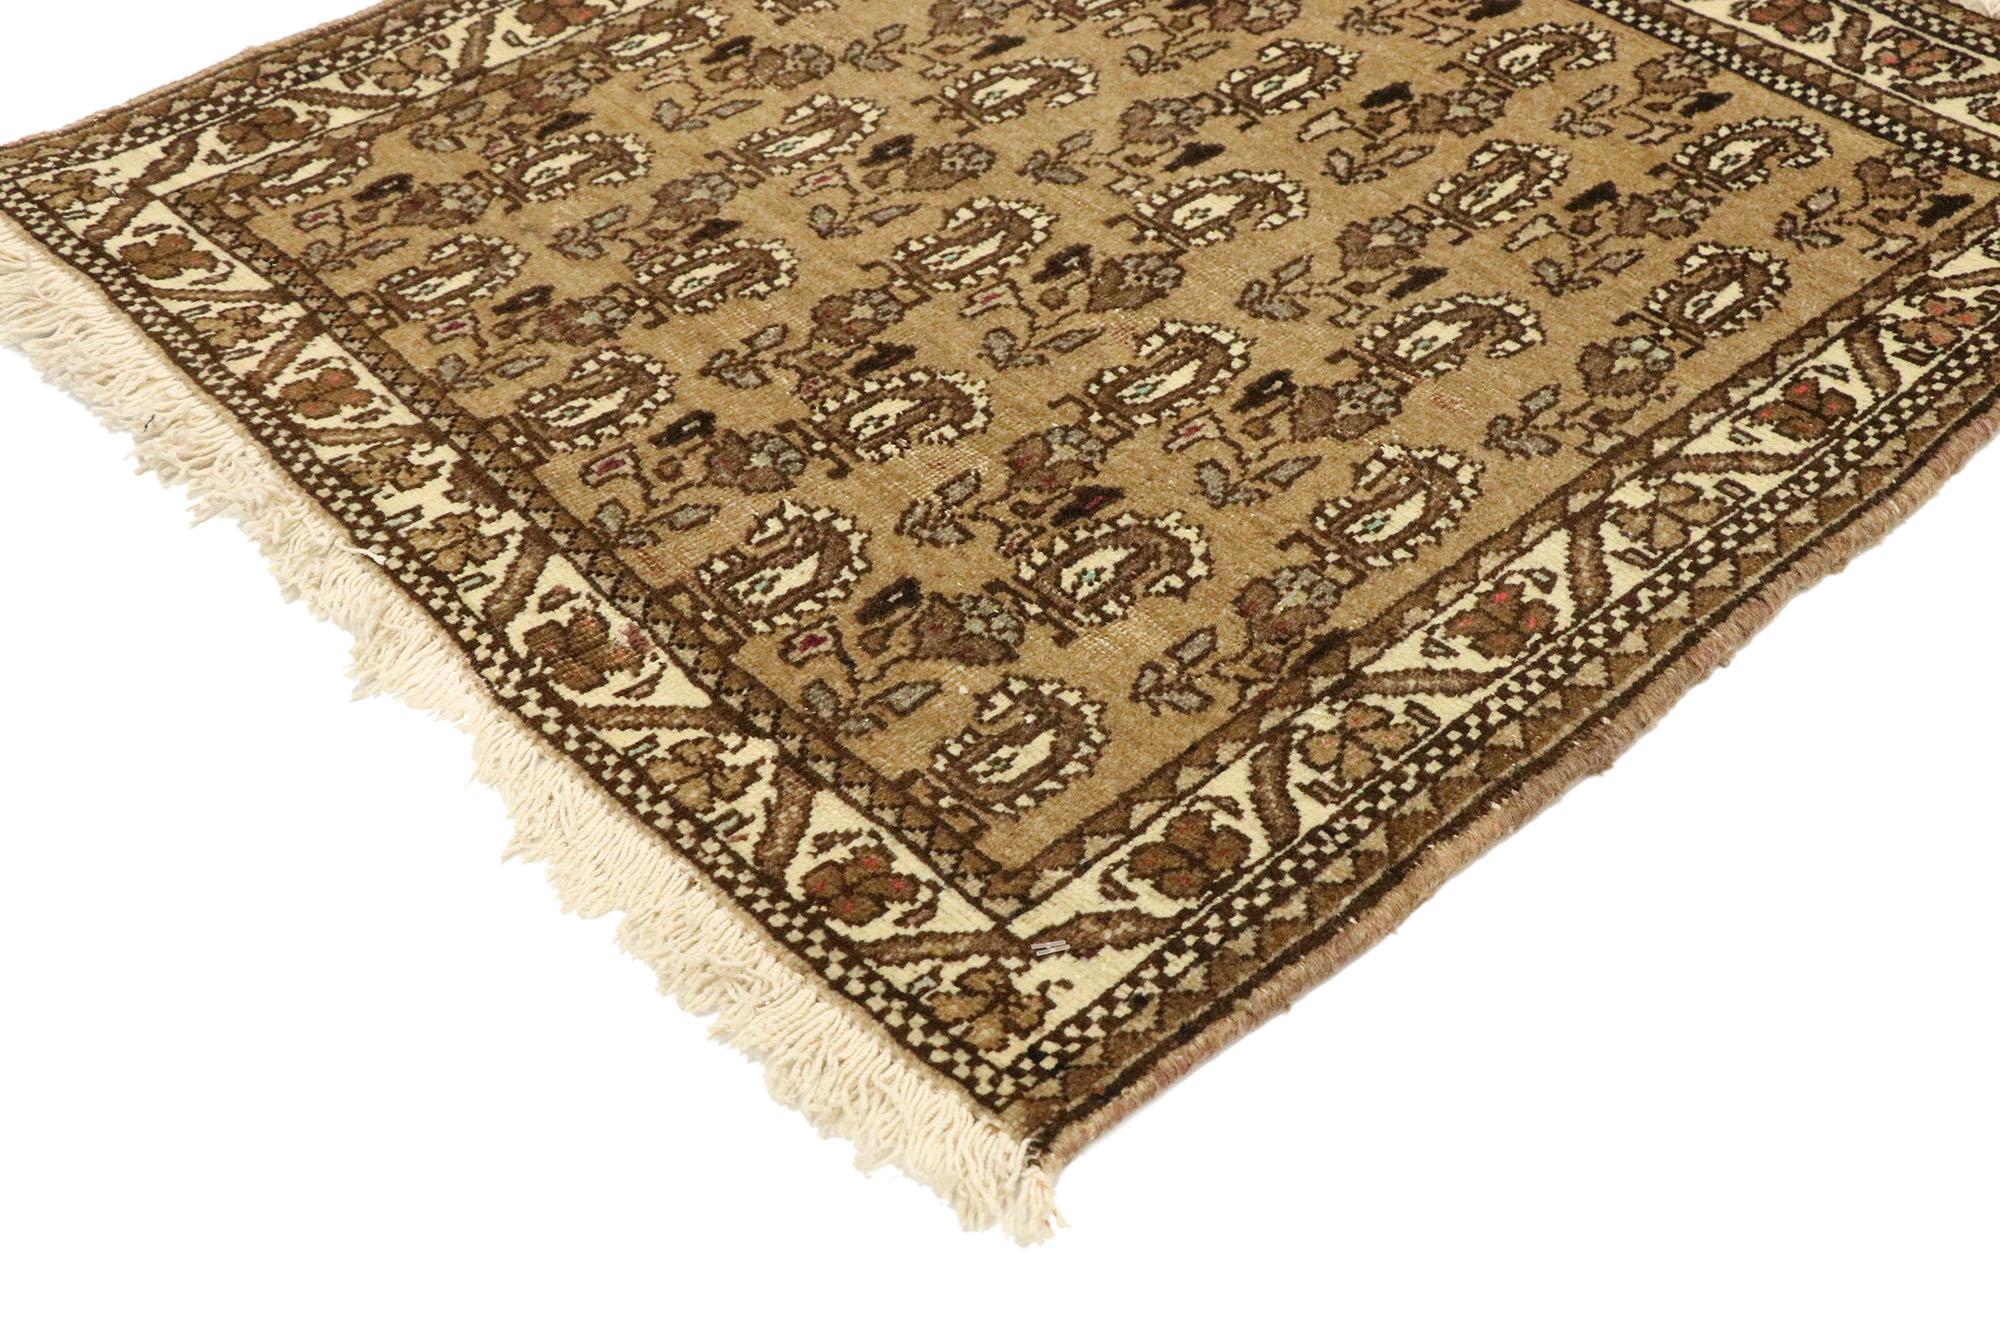 75167 vintage Persian Mashhad Scatter rug with Mid-Century Modern style. With timeless appeal and Mid-Century Modern style, this hand knotted wool vintage Persian Mashhad scatter rug can beautifully blend traditional, modern, and contemporary